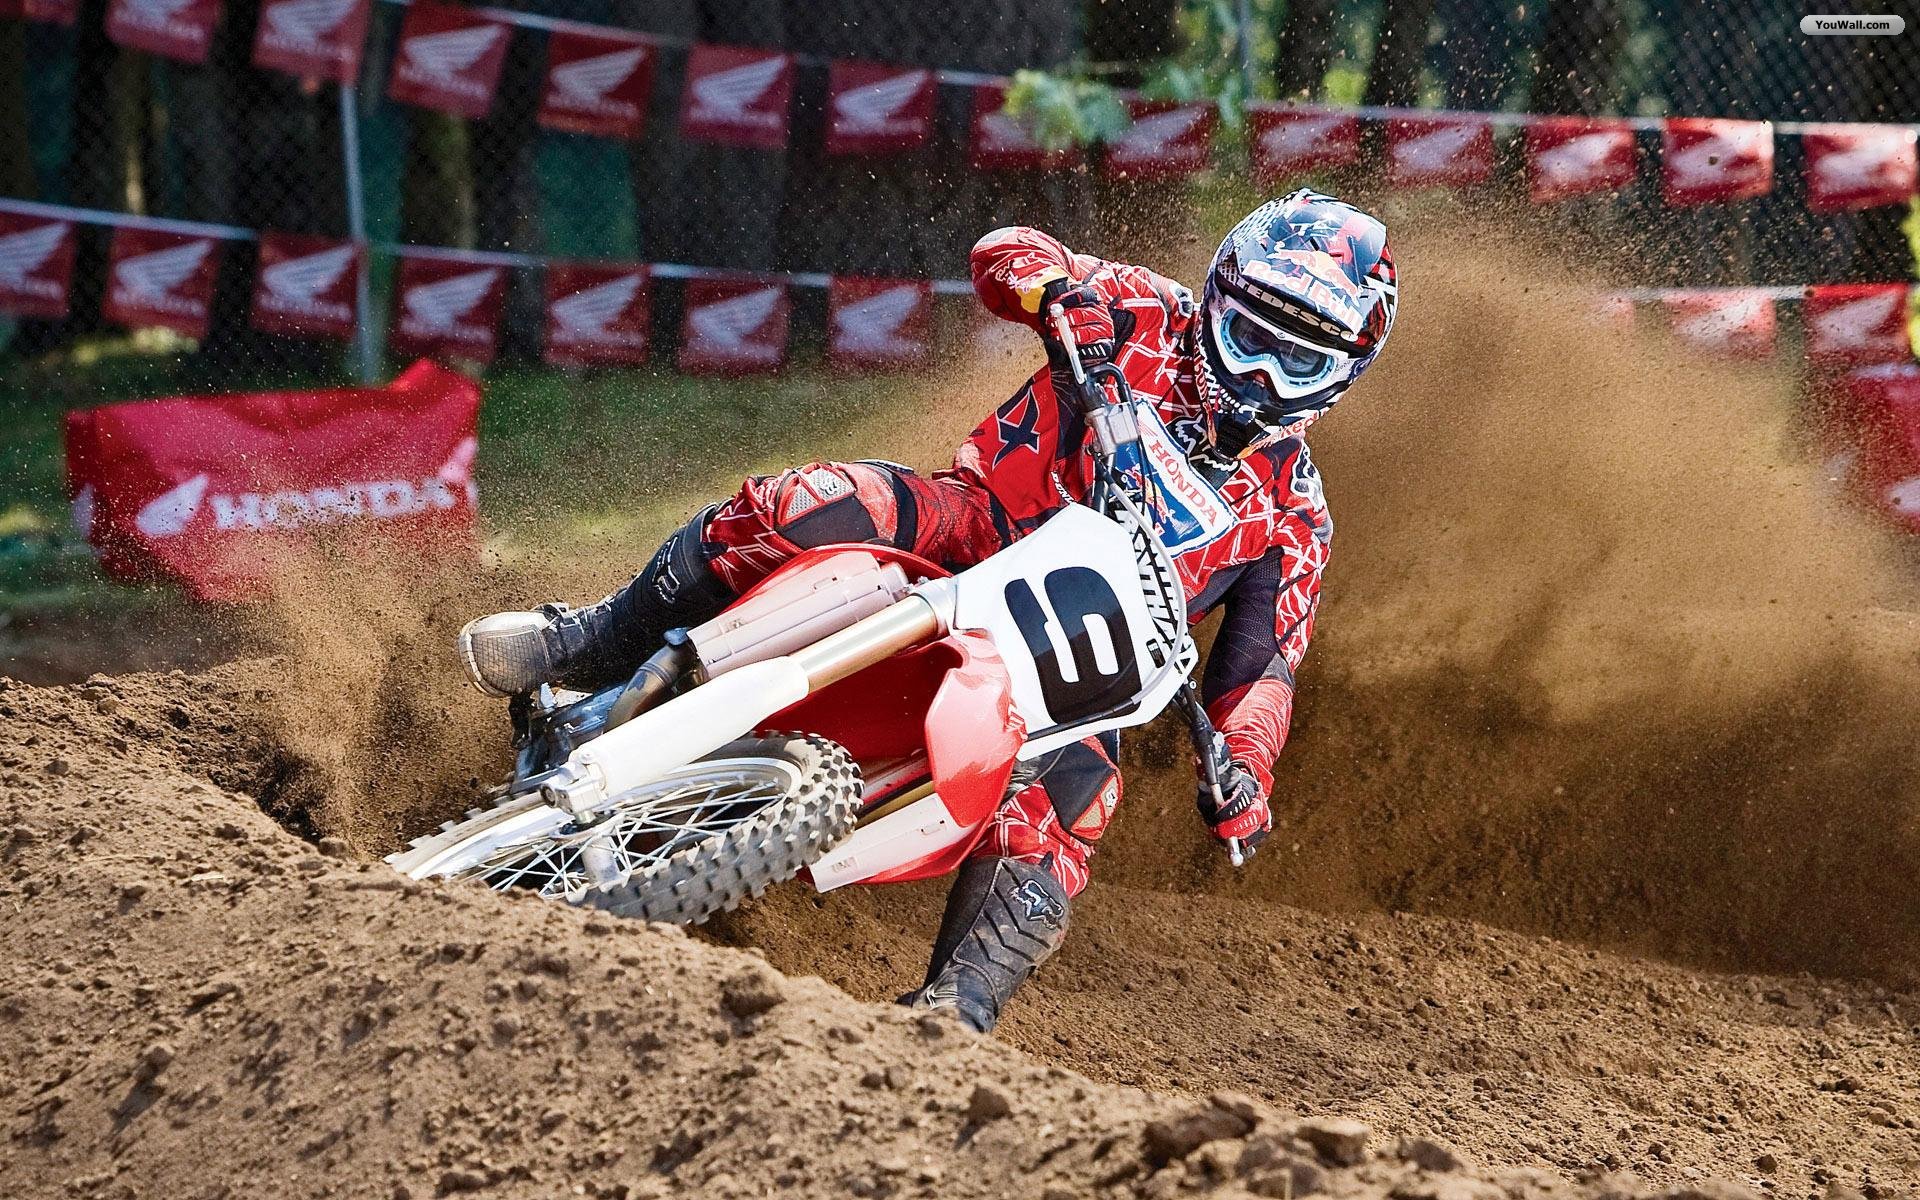 Pin by Alan W on M/C induced smiles | Dirt bike girl 